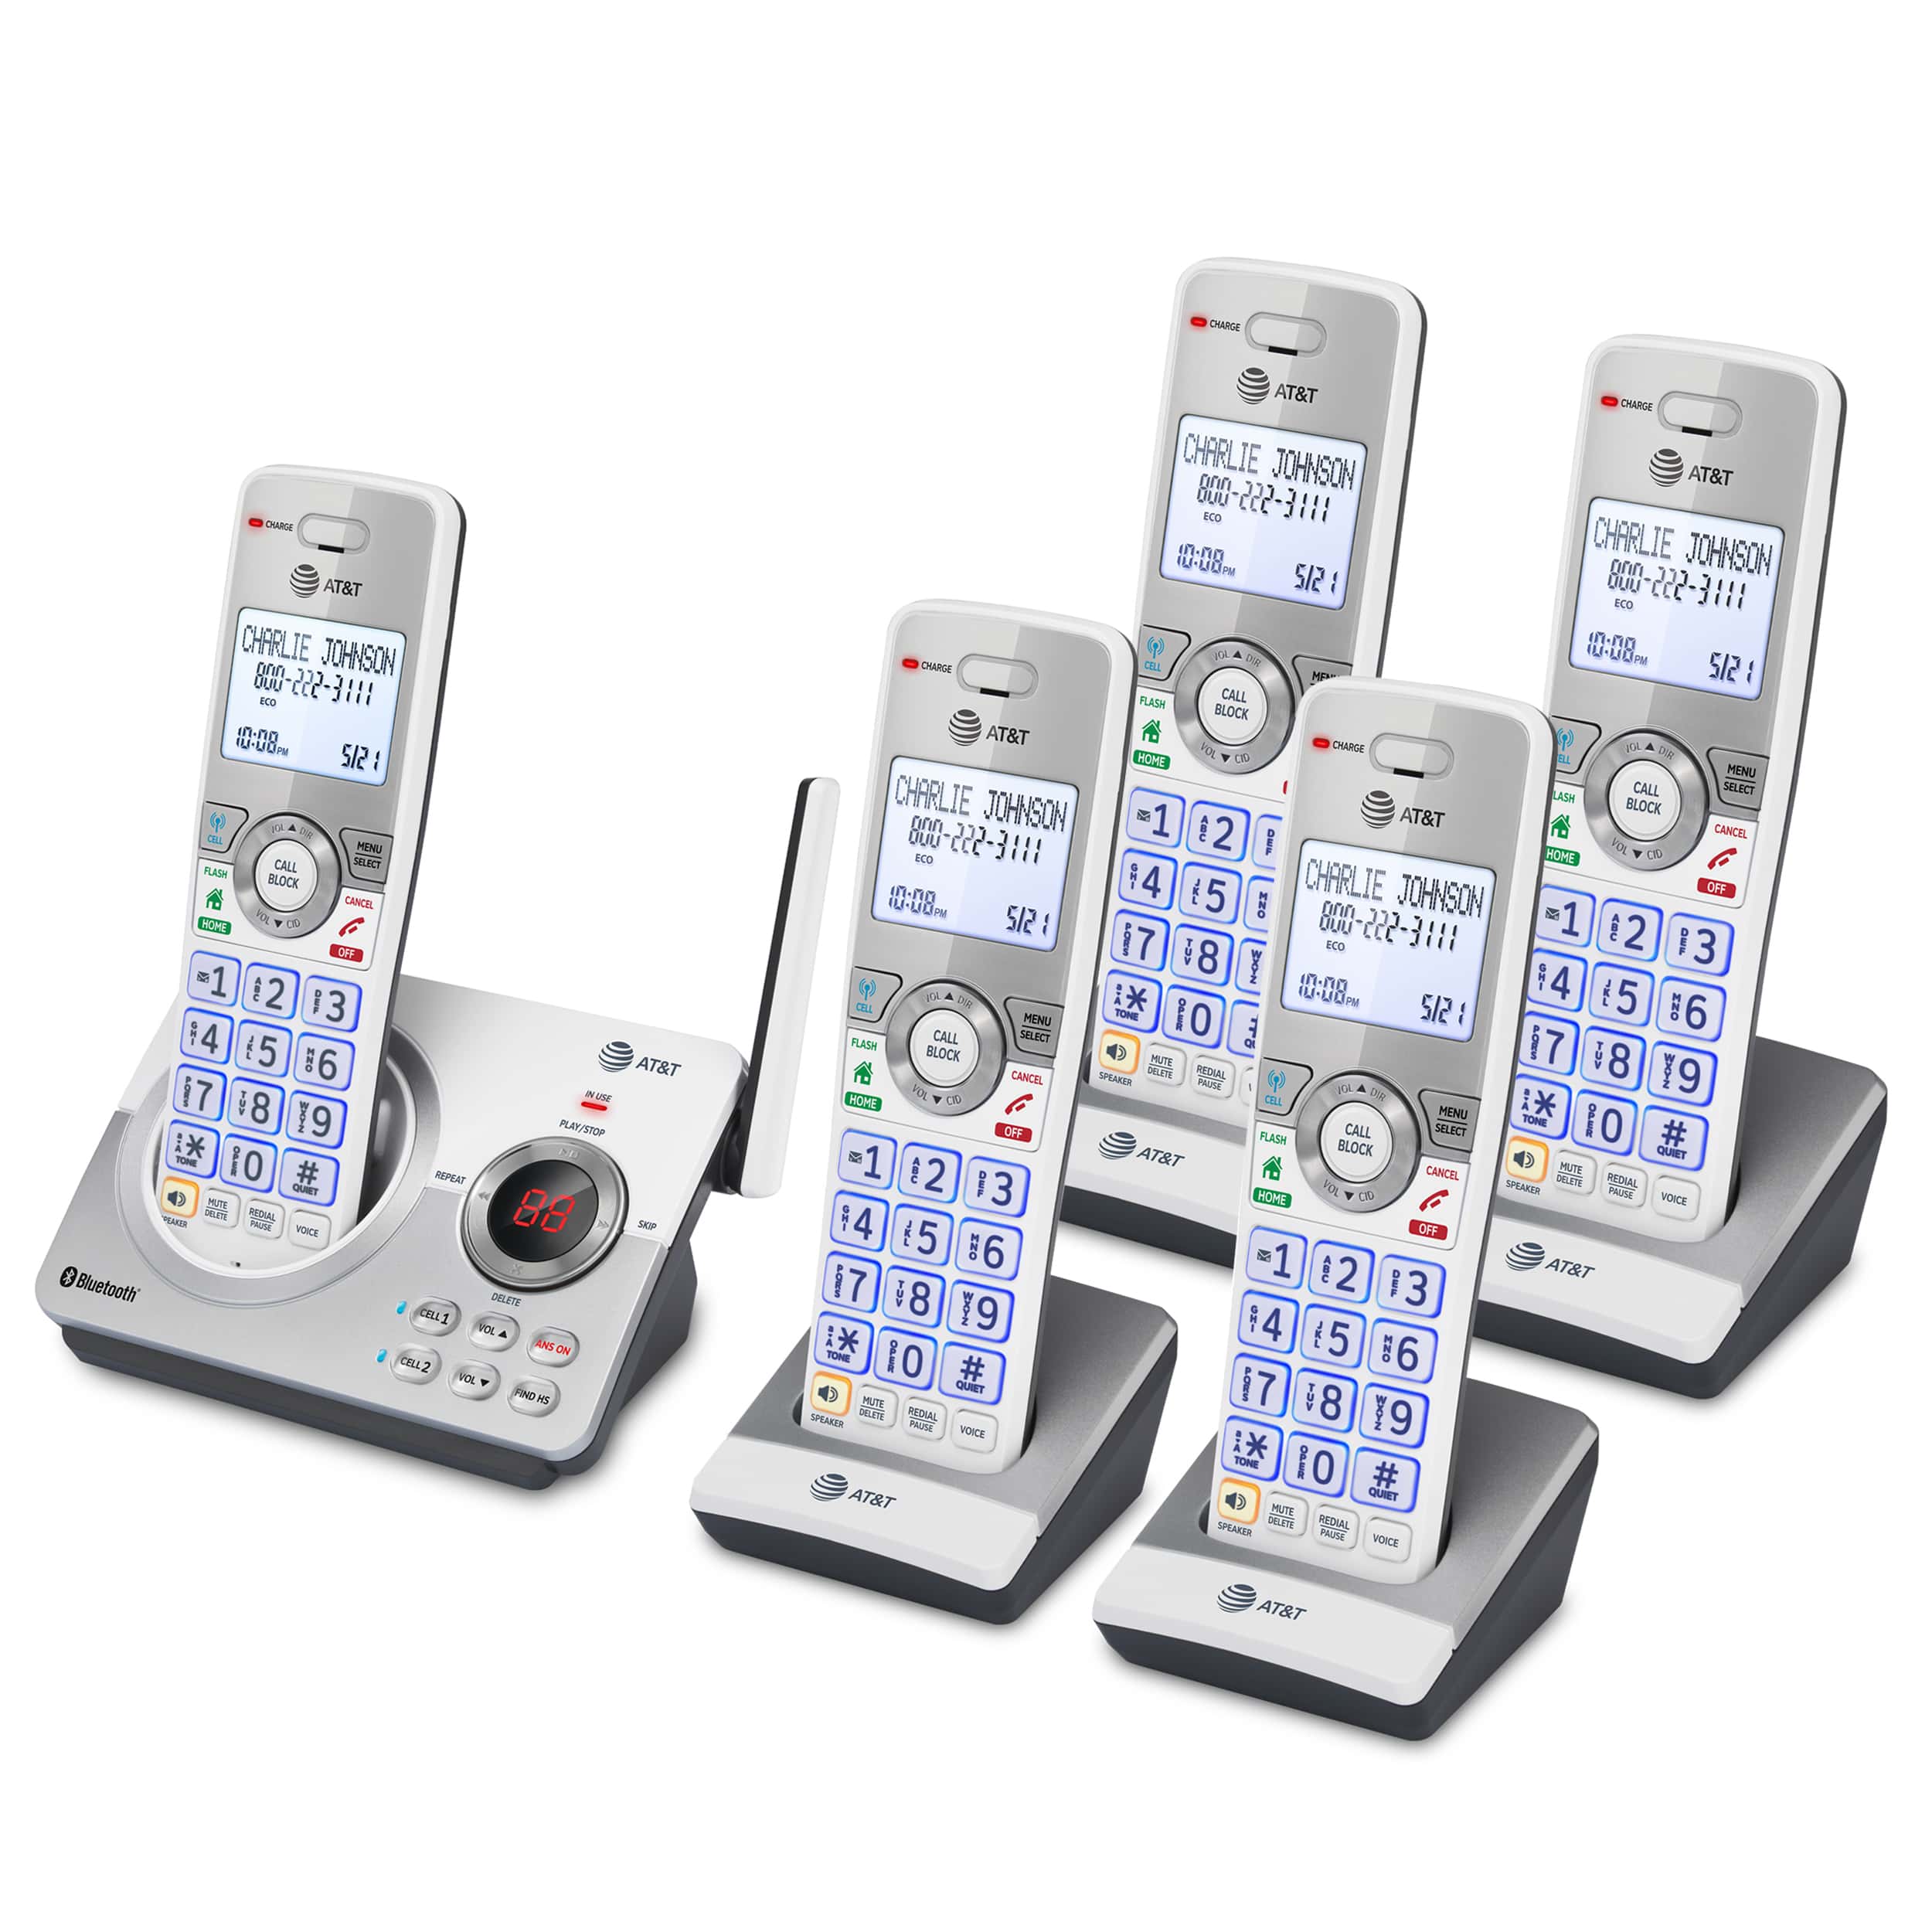 5-Handset Expandable Cordless Phone with Unsurpassed Range, Bluetooth Connect to Cell™, Smart Call Blocker and Answering System (Champagne) - view 2